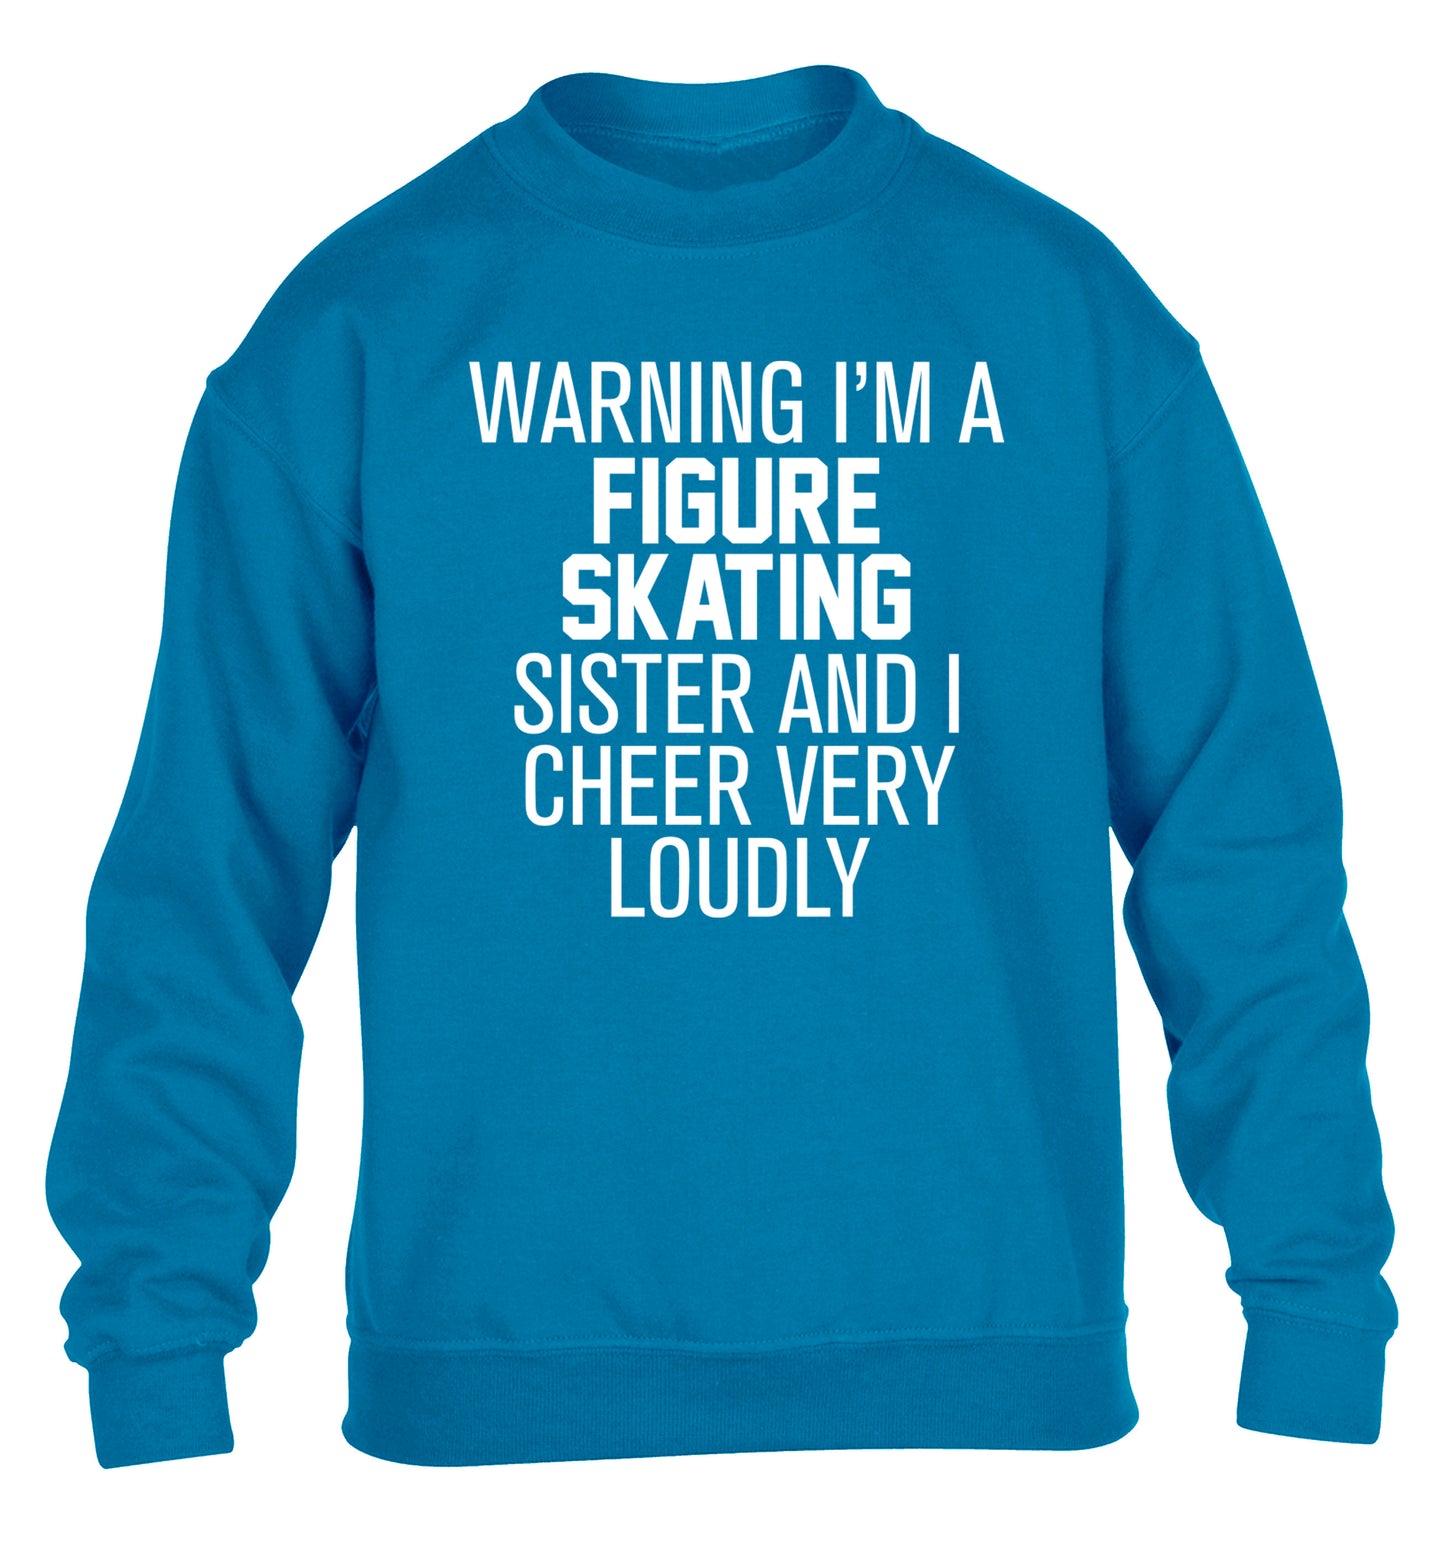 Warning I'm a figure skating sister and I cheer very loudly children's blue sweater 12-14 Years